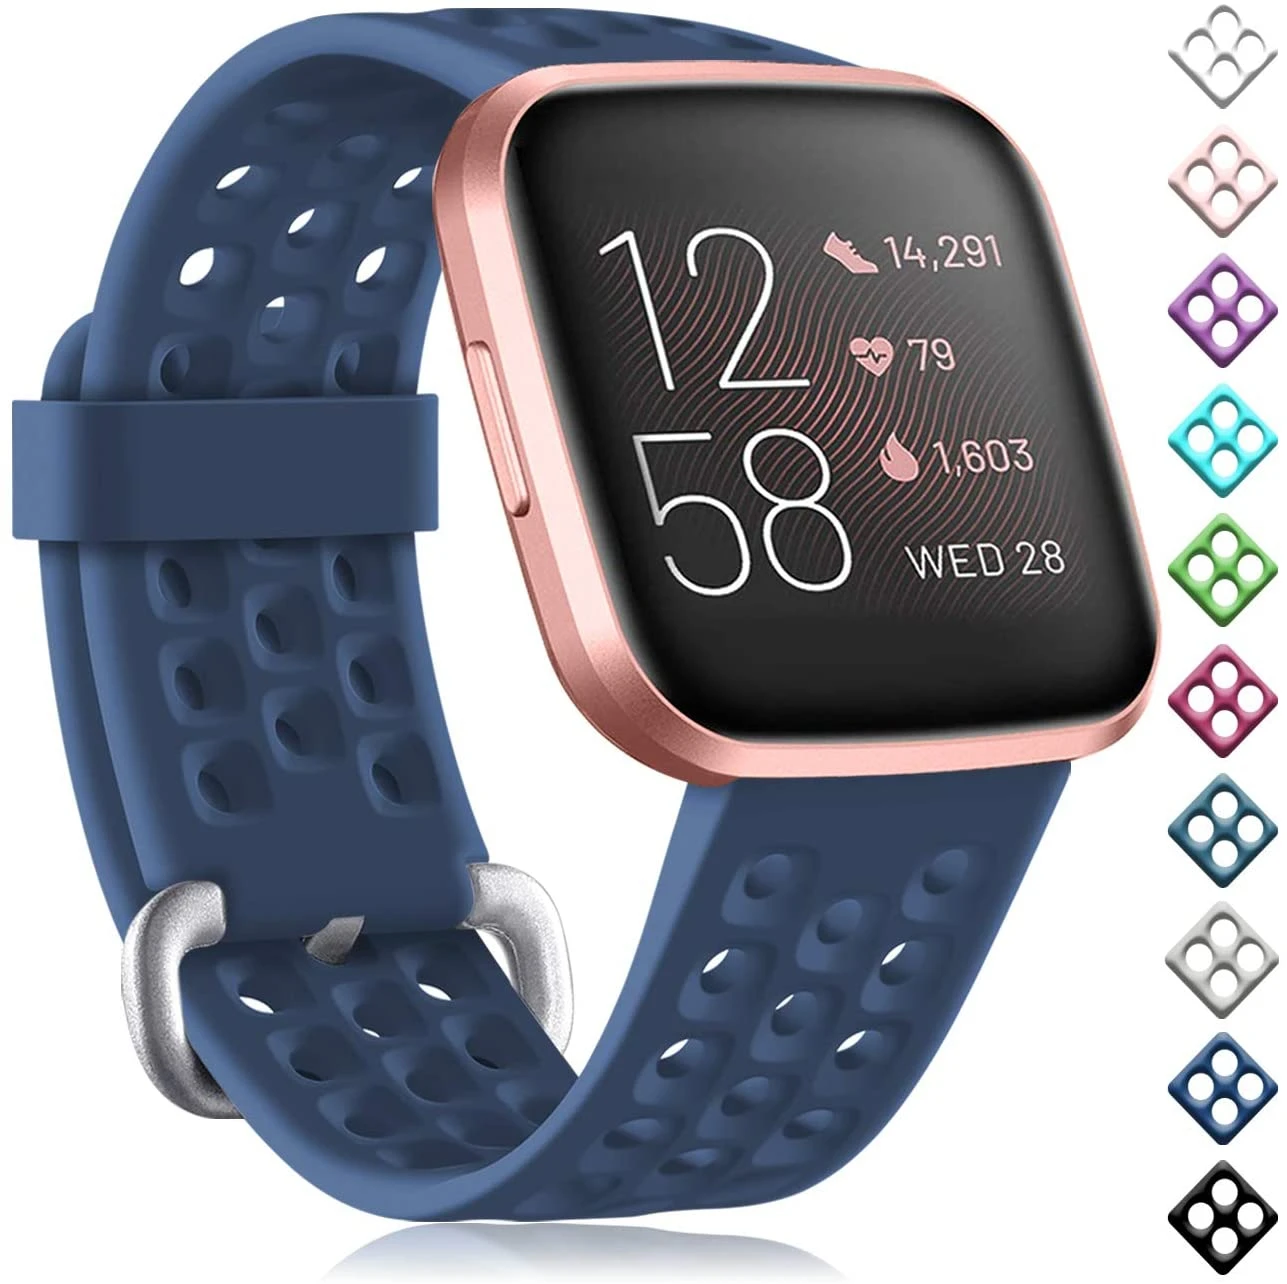 Replacement Band For Fitbit Versa/Versa 2 Soft Silicone Waterproof Wrist Accessories Watch Strap For Fitbit Versa 2 Band